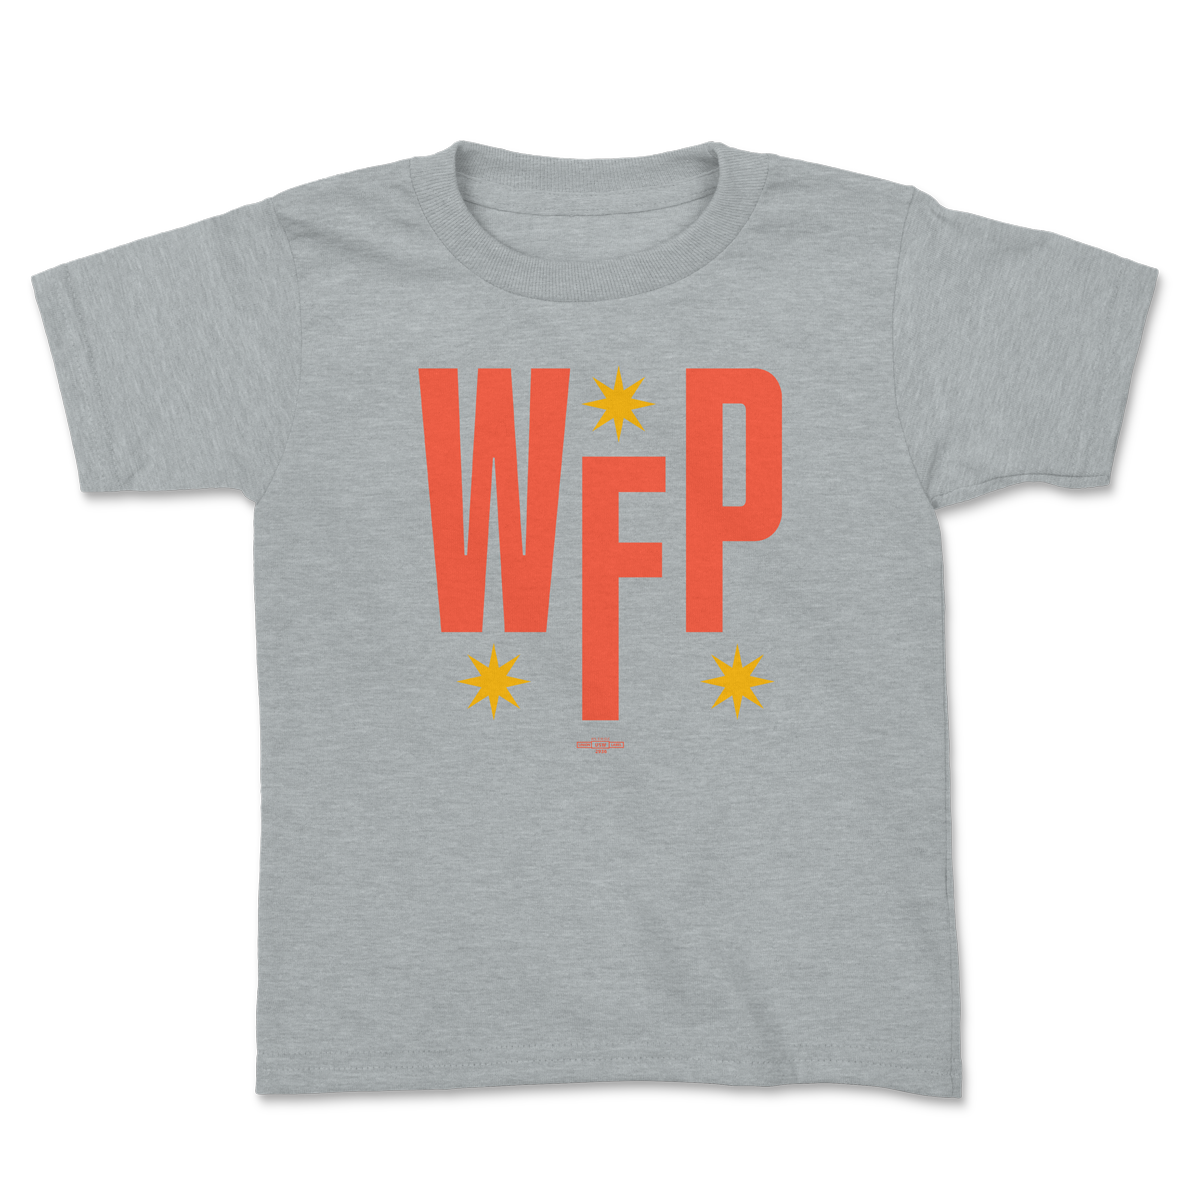 WFP Compass Rose Youth Tee